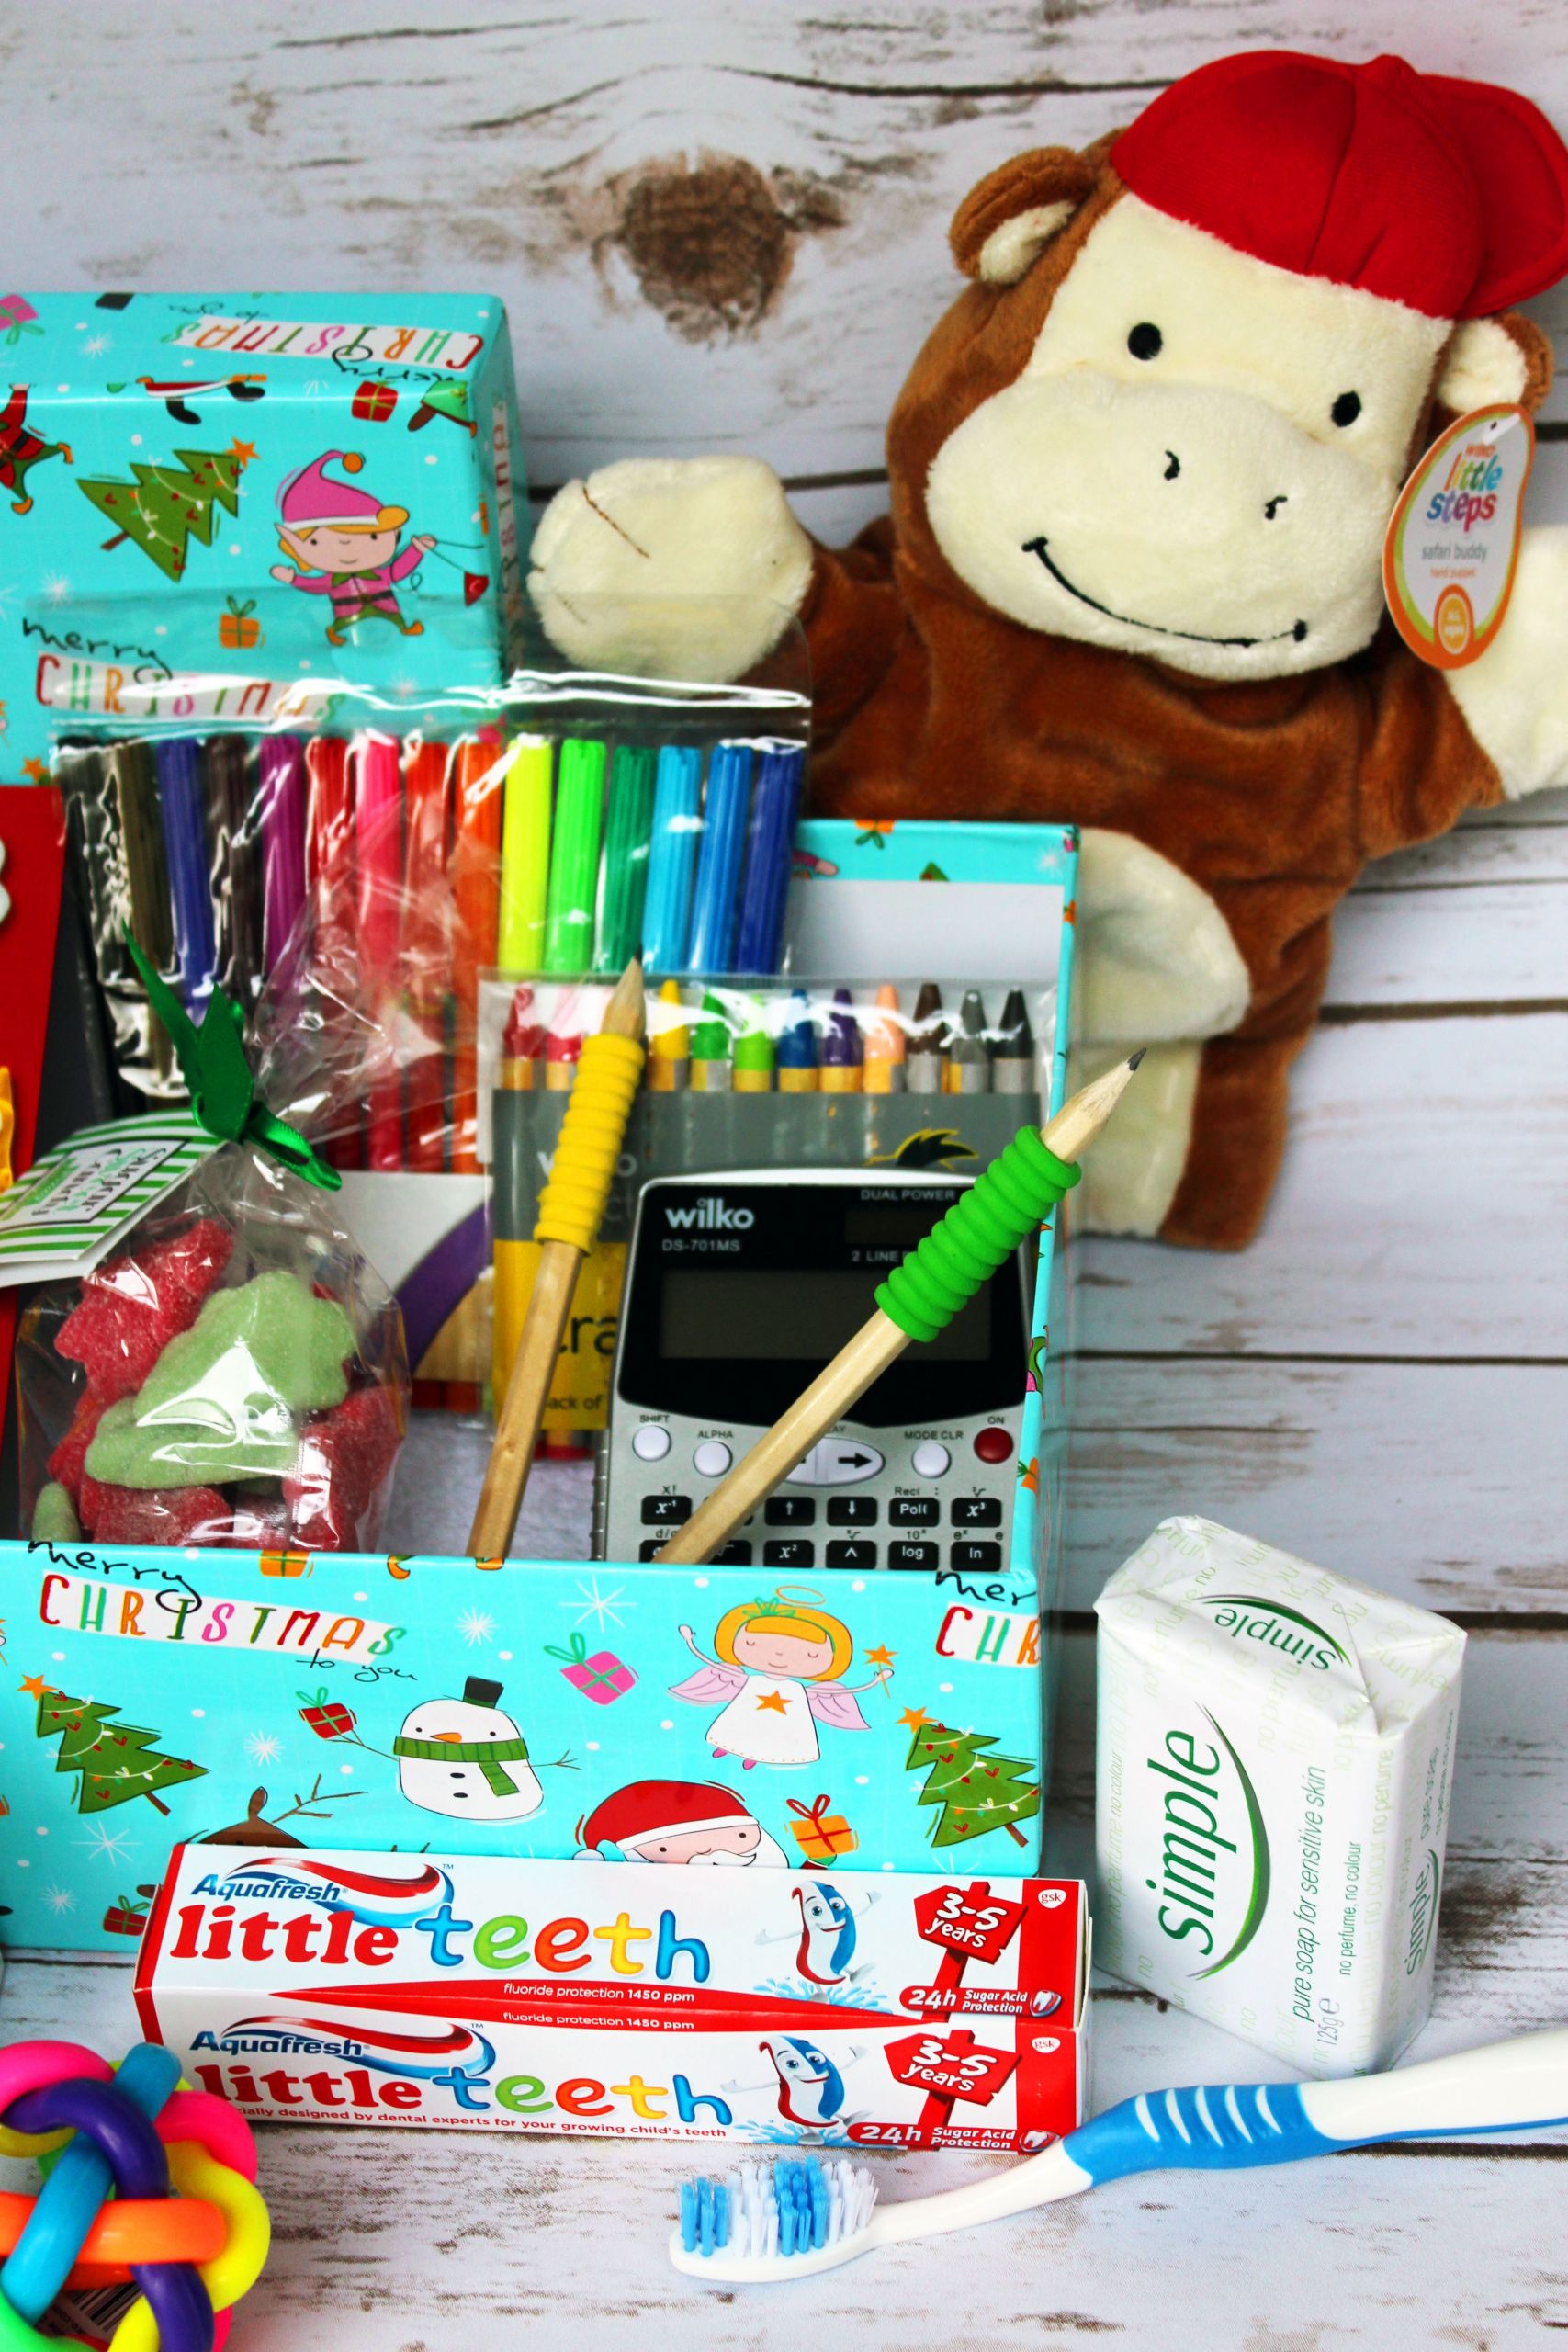 Operation Christmas Child Gifts
 Charitable Gifts this Christmas Operation Christmas